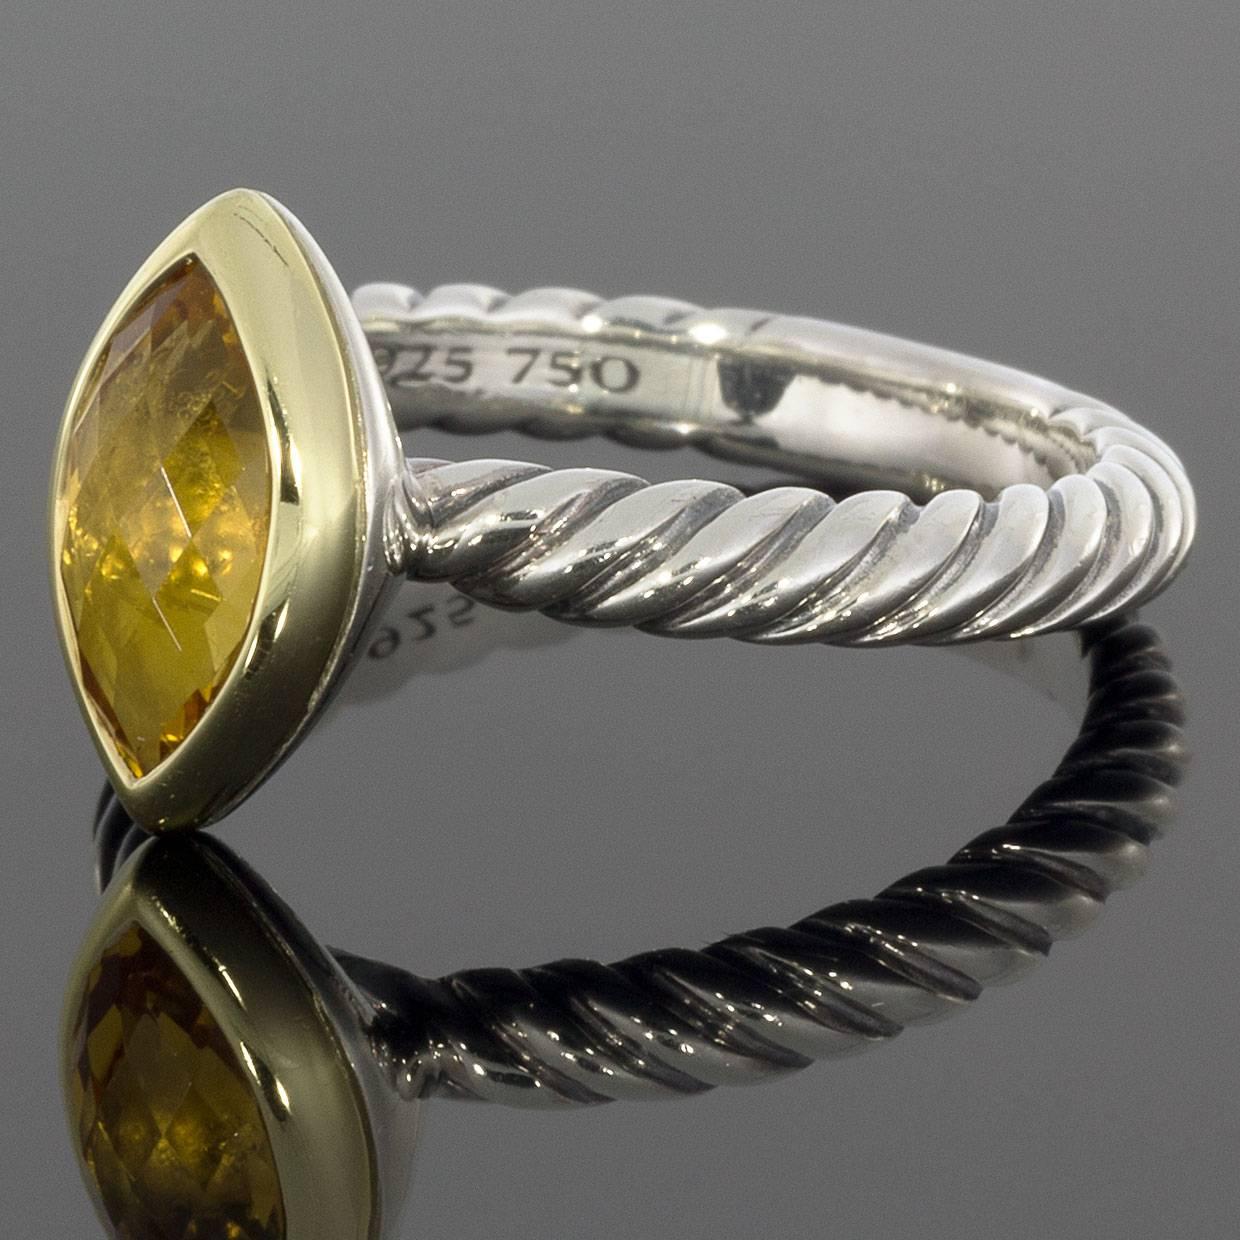 In 1980, sculptor-turned-jeweler David Yurman introduced his eponymous collection. His artistic, sculptural pieces were a refreshing new interpretation, but David Yurman truly changed the trends of fashion with his now-classic, twisted,